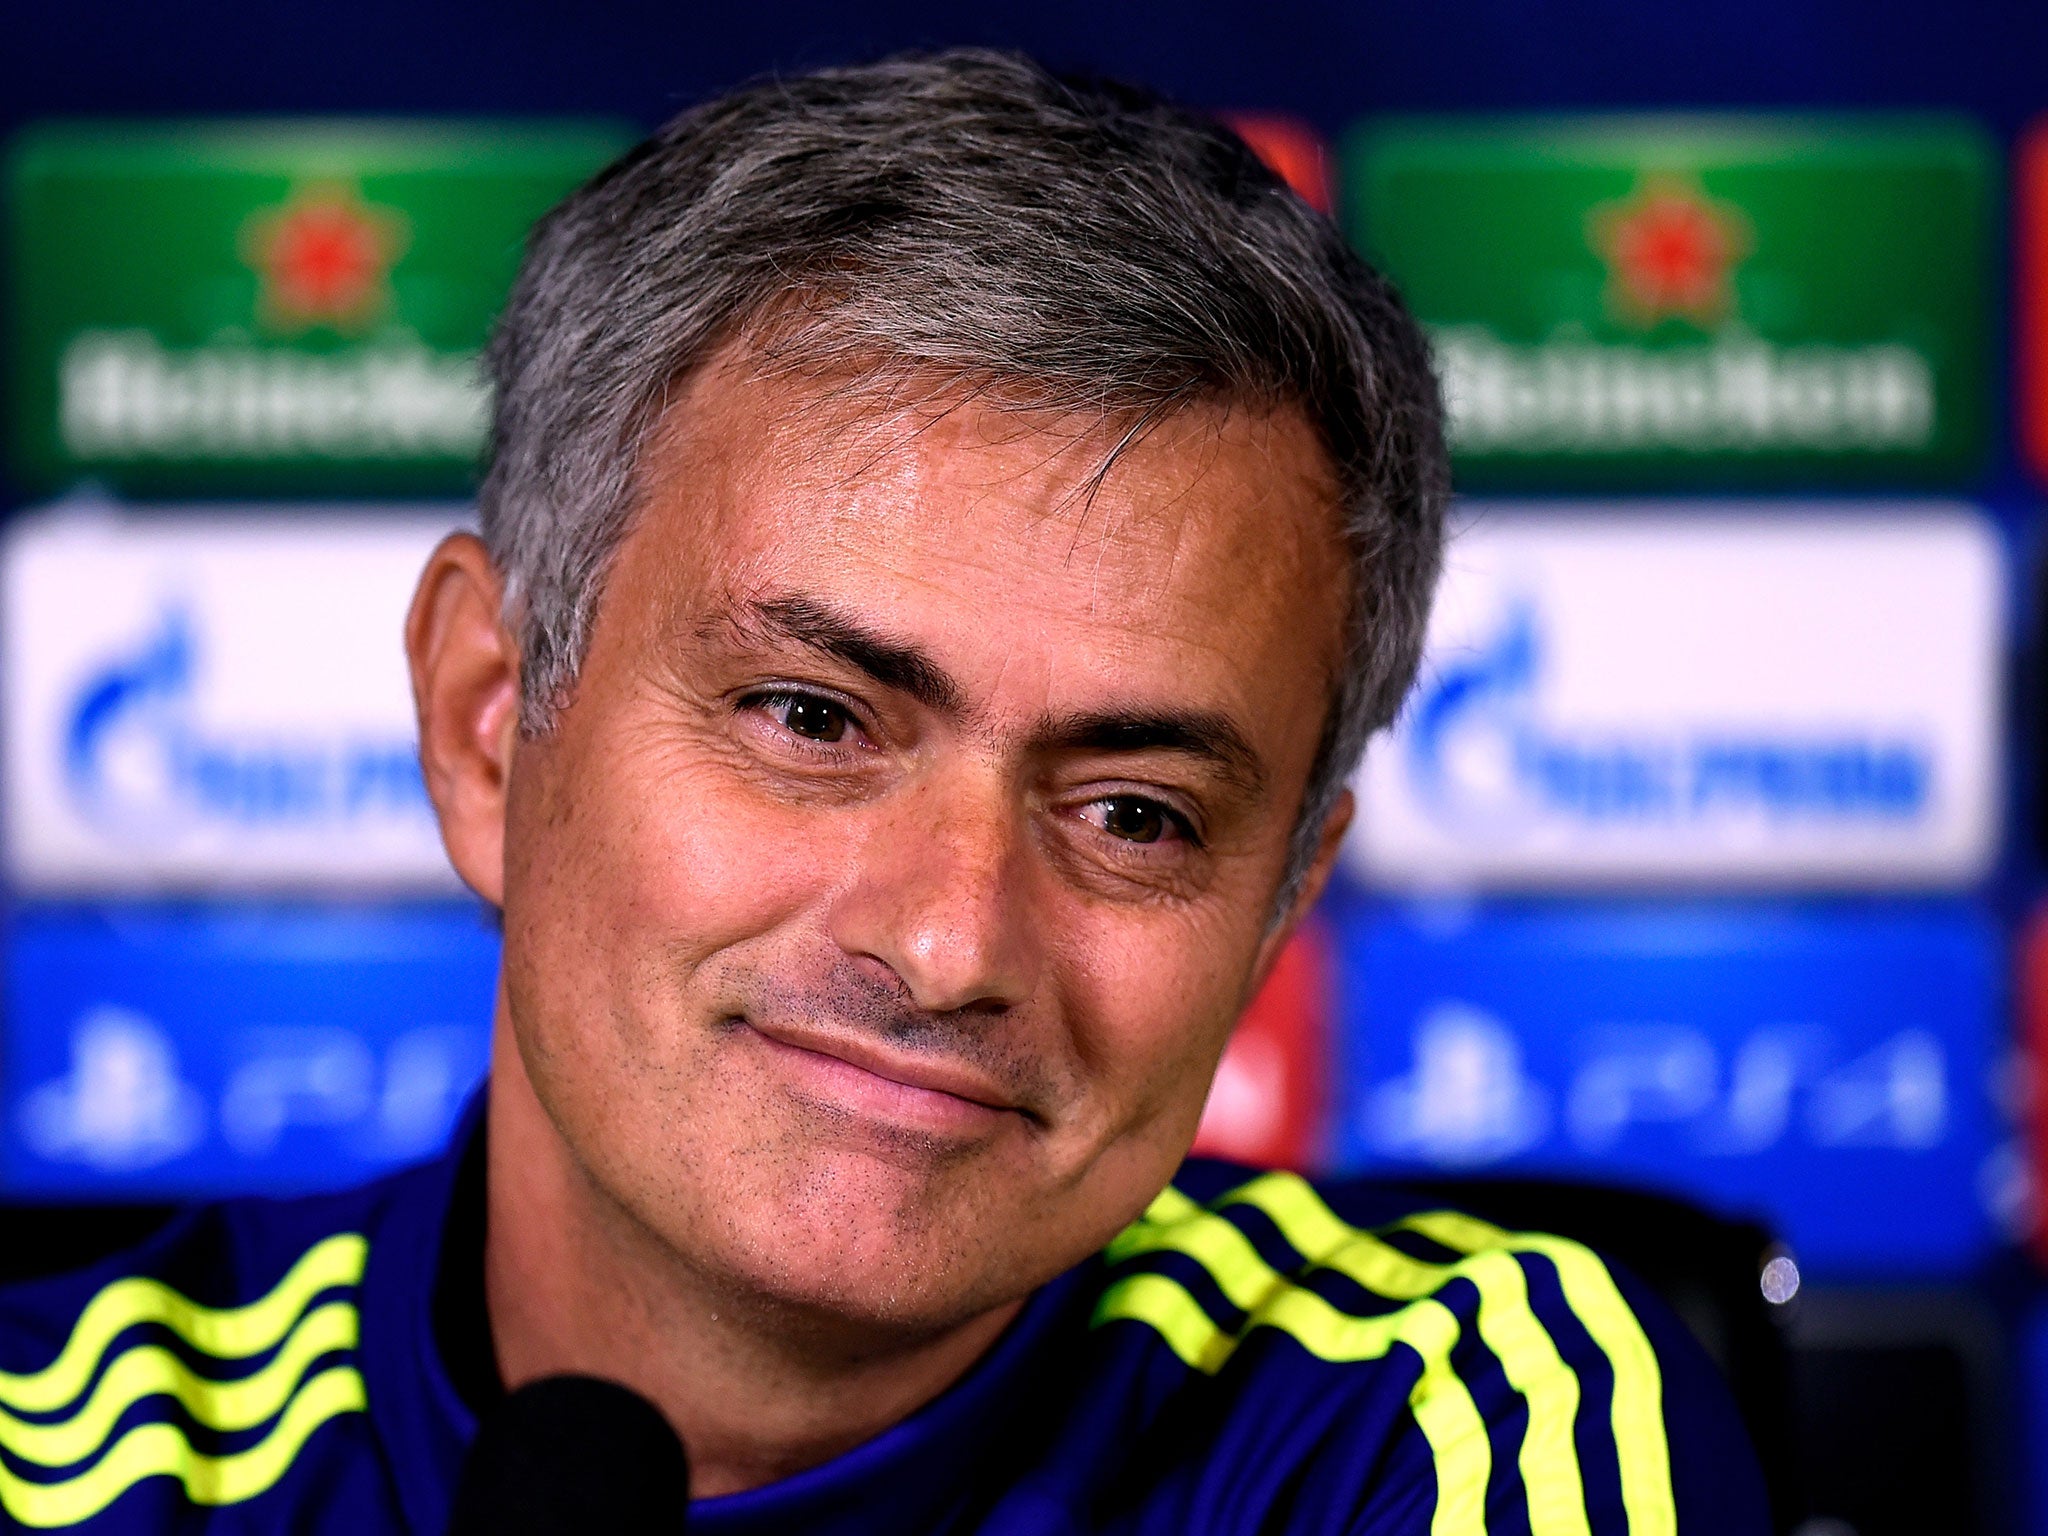 Jose Mourinho during his pre-match press conference ahead of the Champions League tie with Maribor